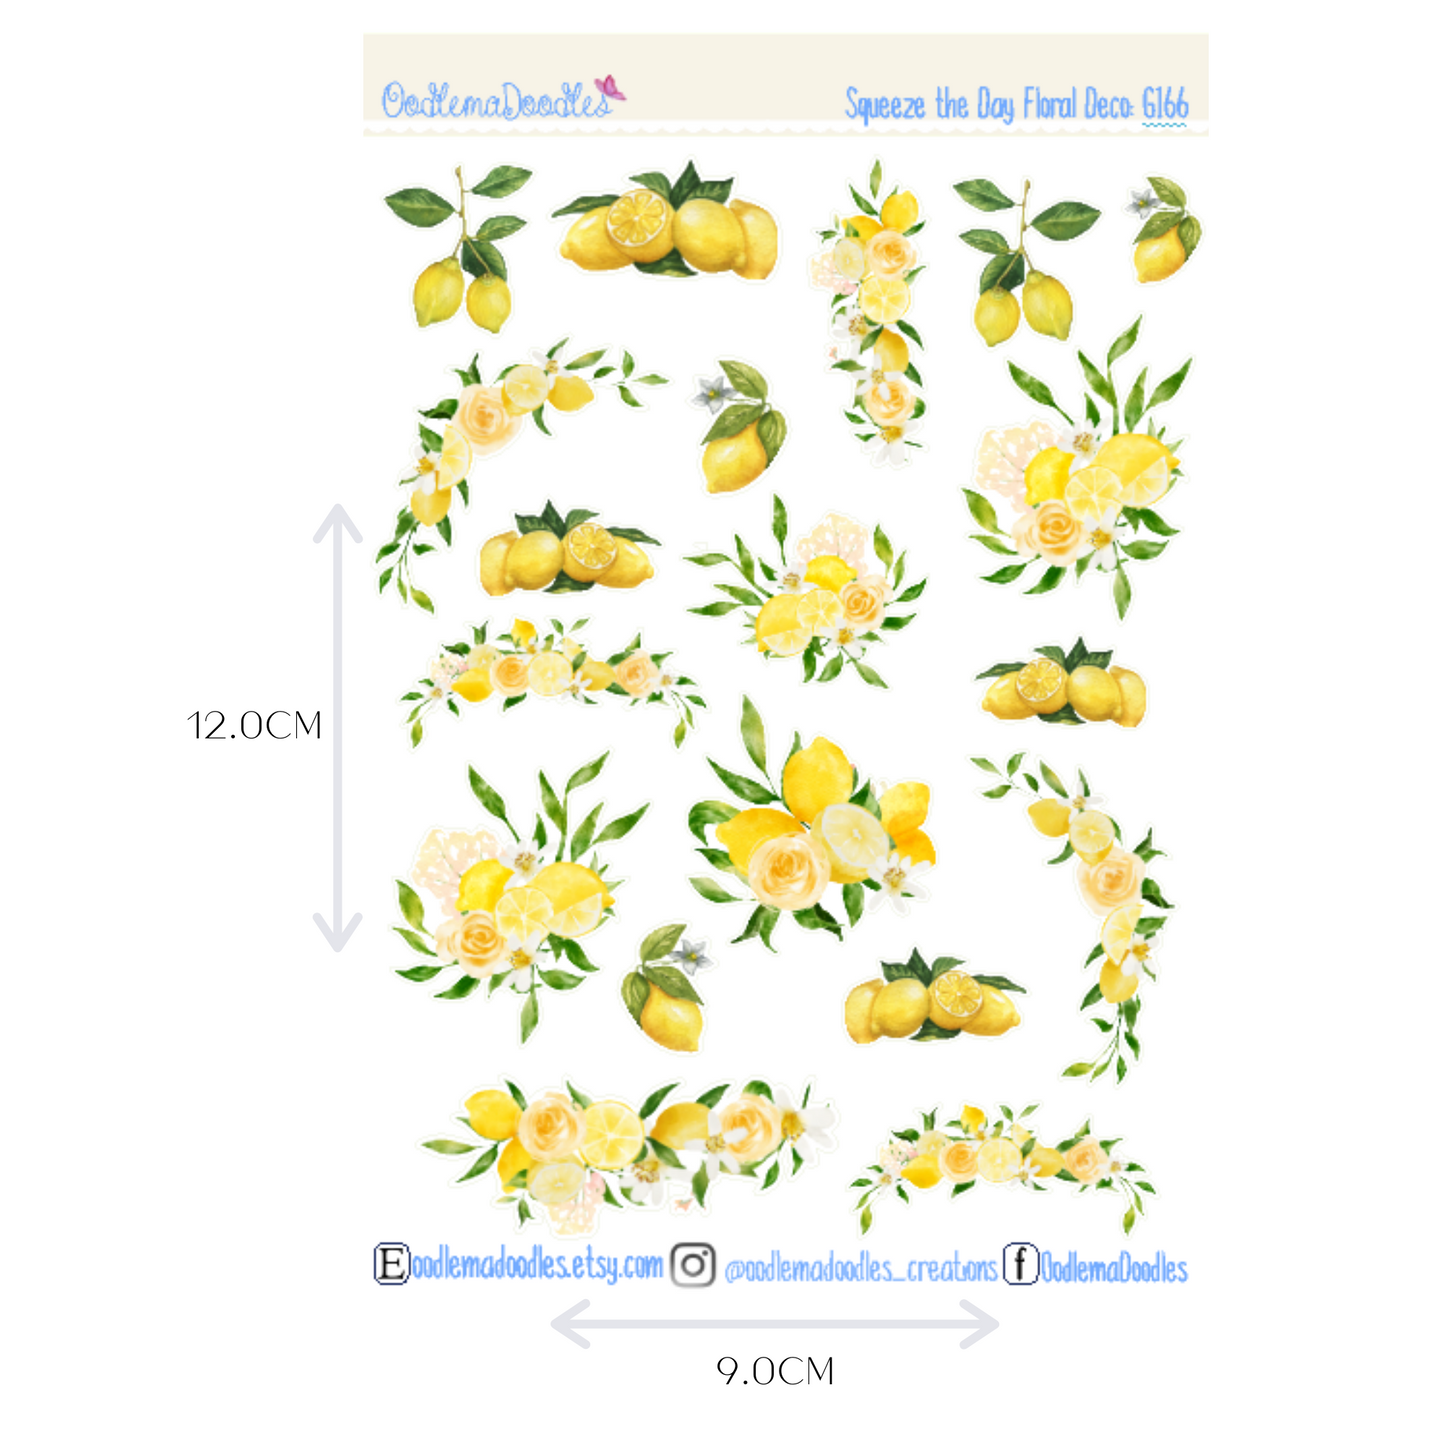 Squeeze the Day Floral Decorative Stickers